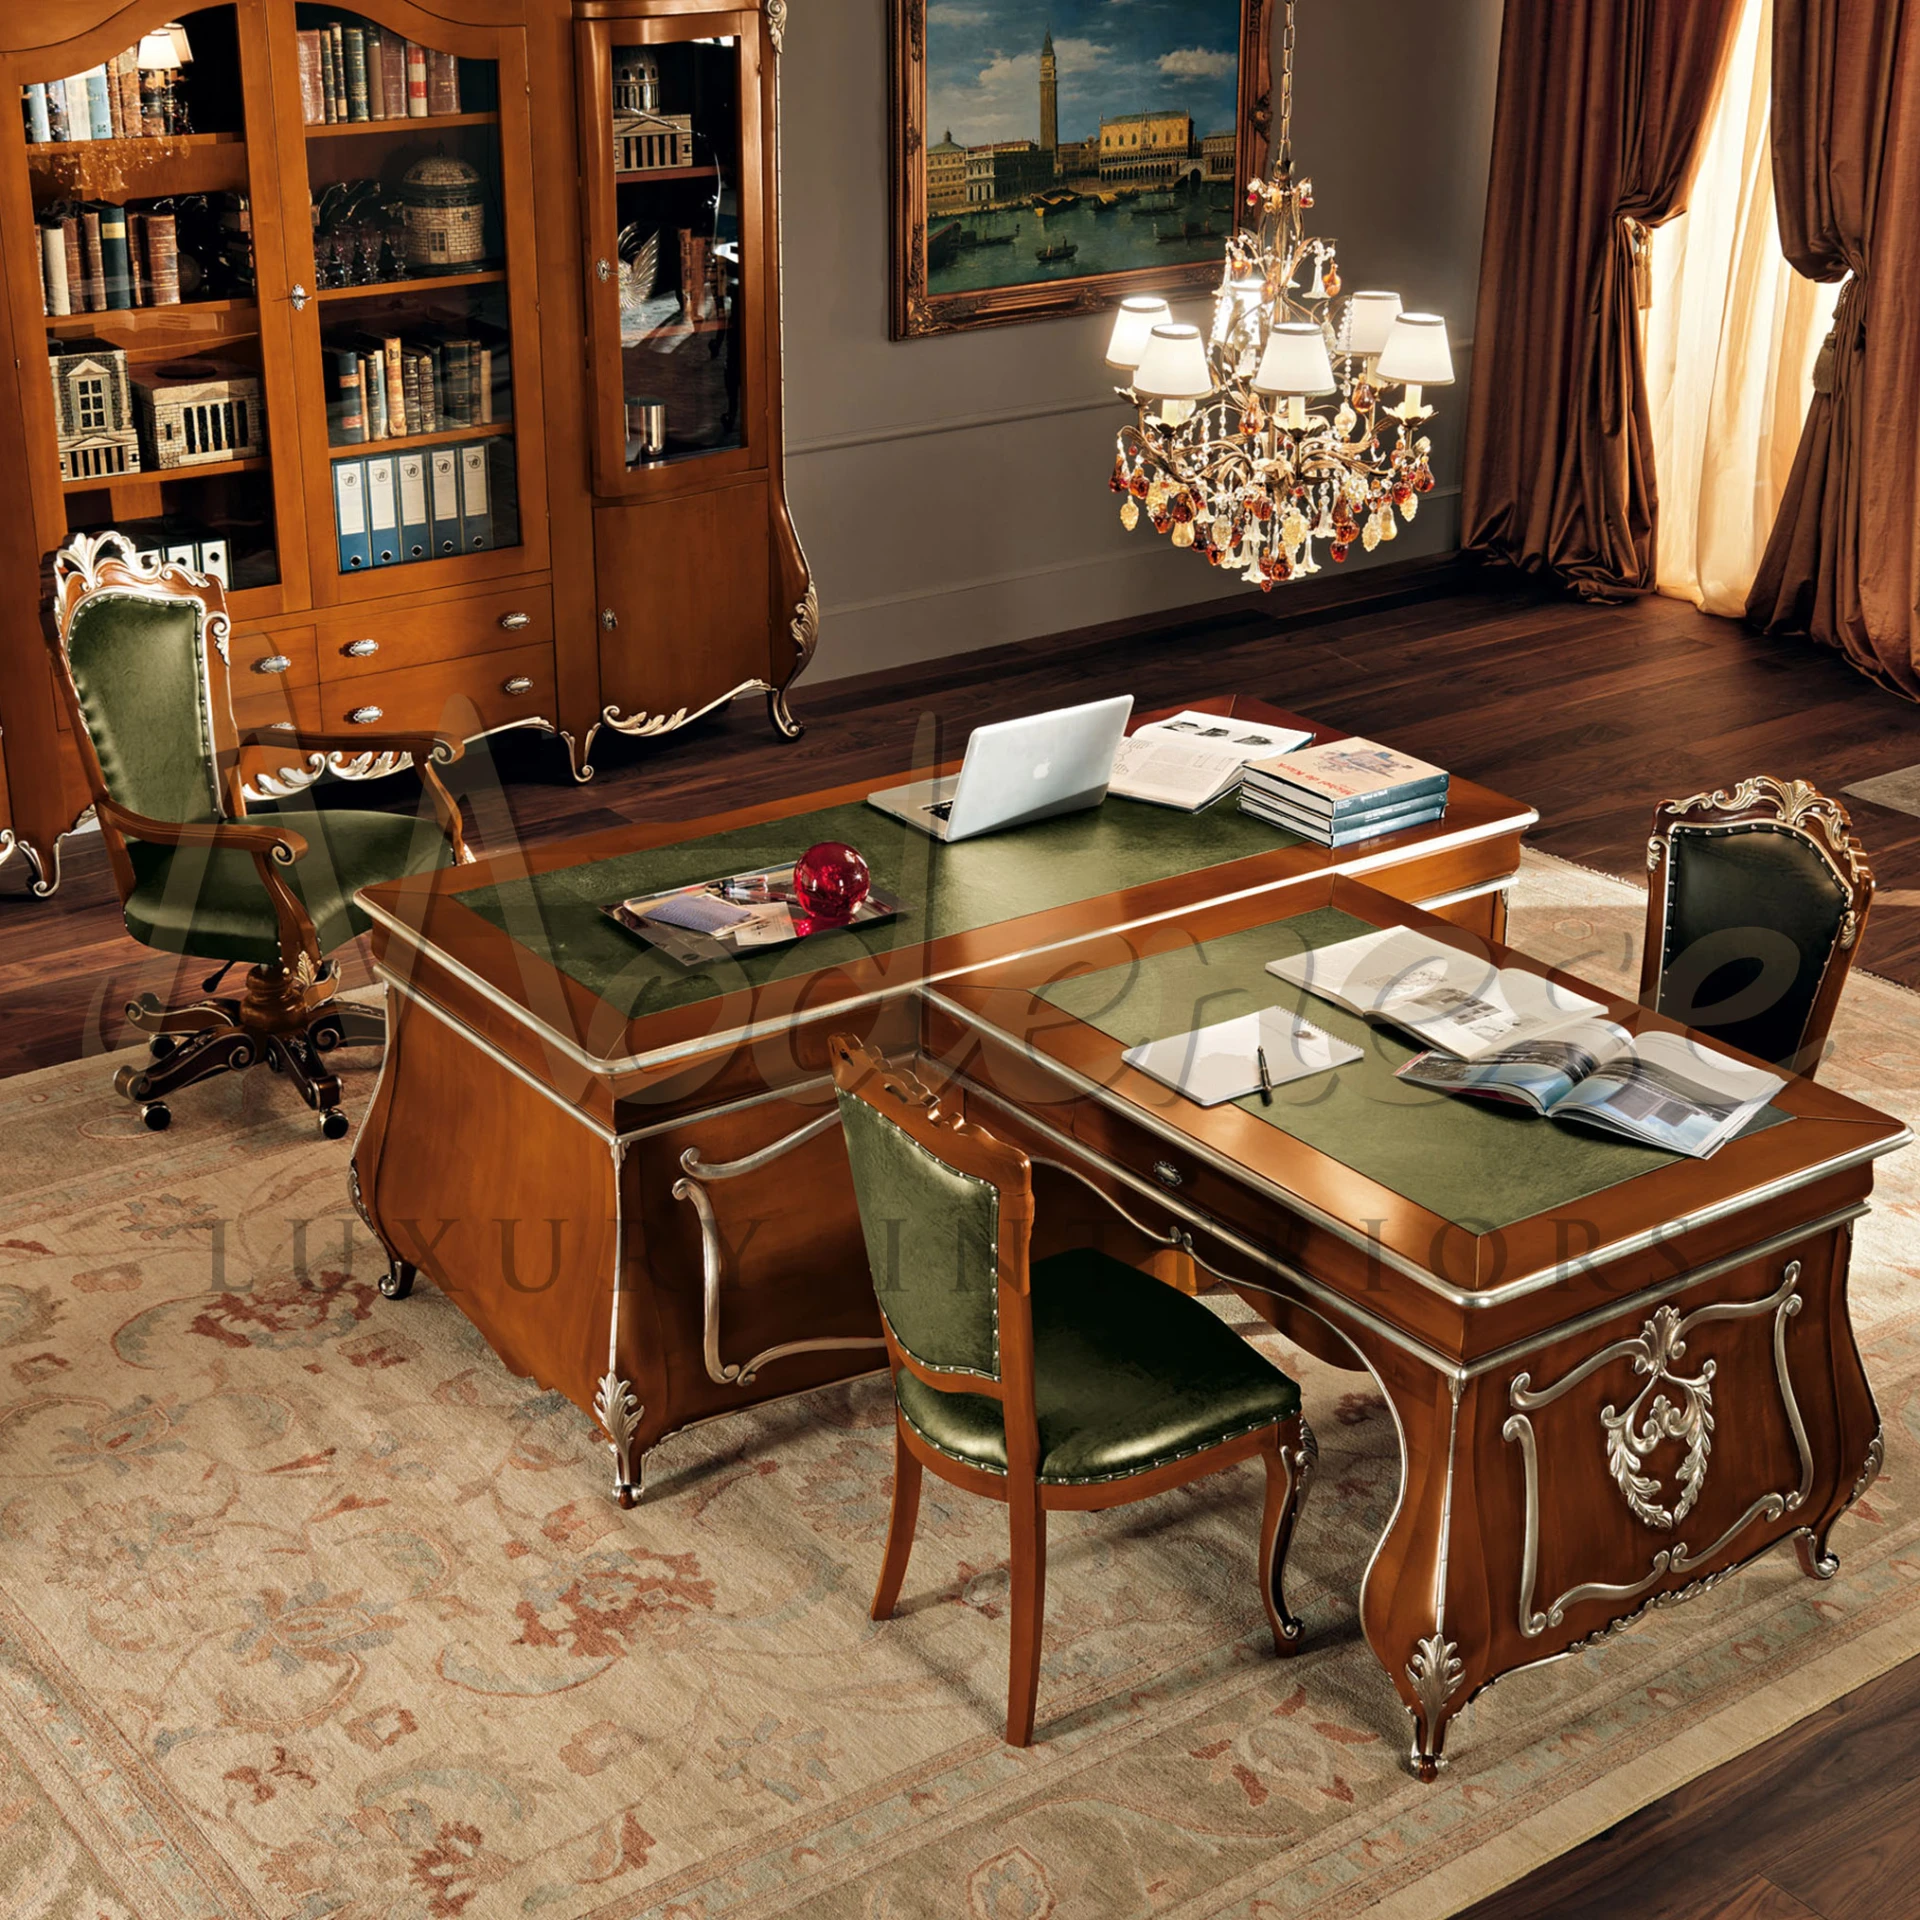 Full view of the spacious room with a desk, swivel office chair, bookcase and a chandelier hanging from the ceiling.